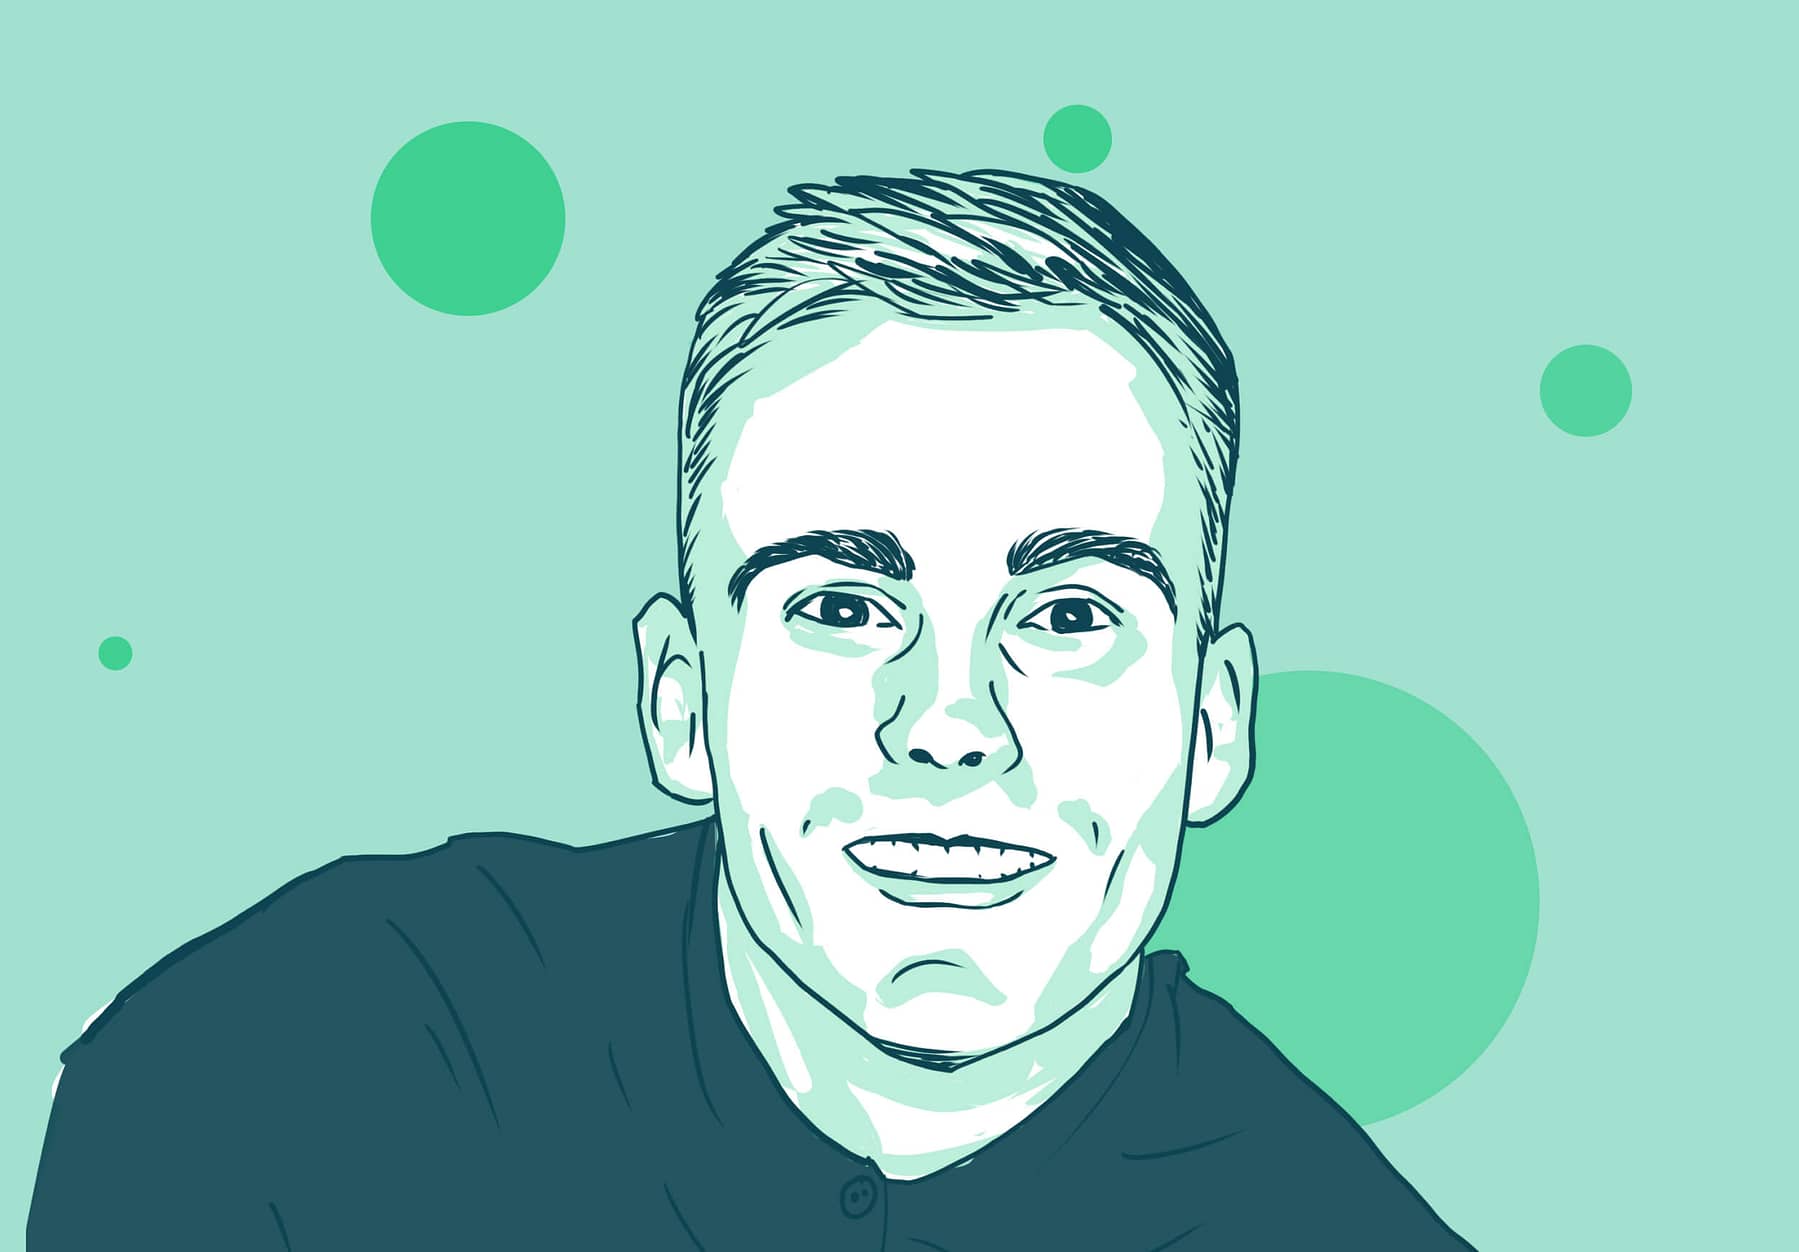 Illustrated portrait of Elliot Bowen, founder of Silly UI